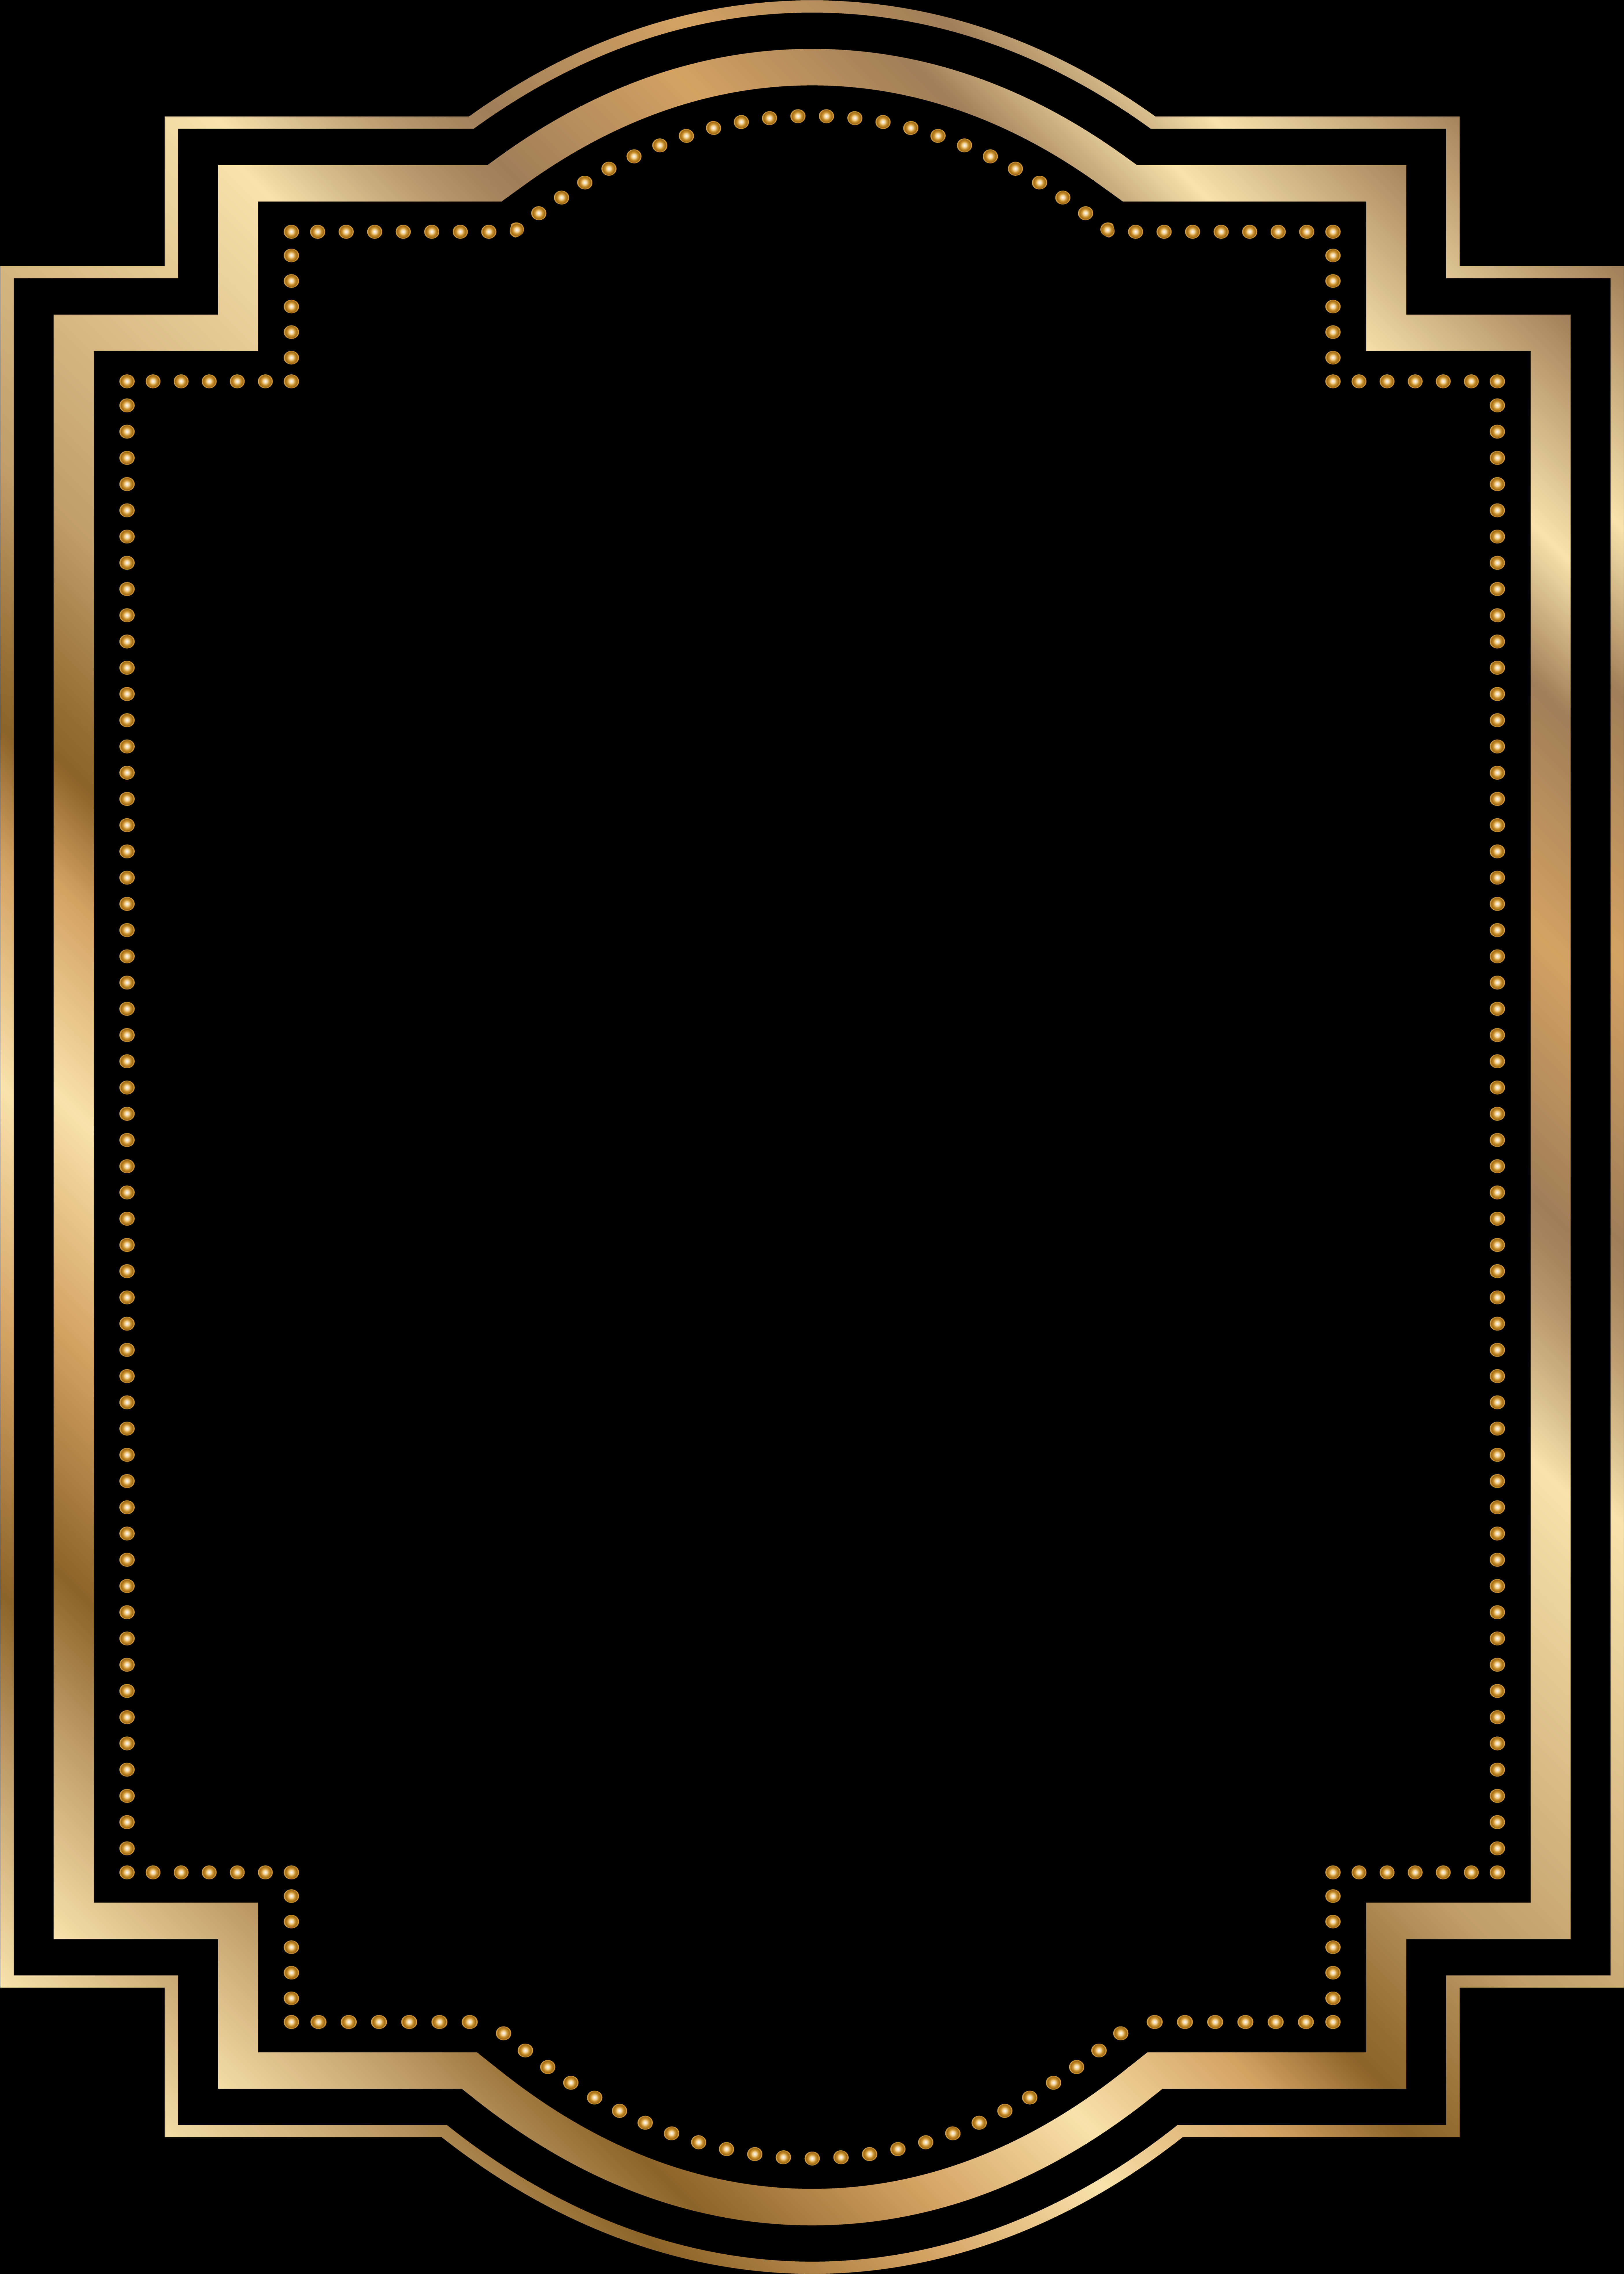 A Gold And Black Rectangle Frame